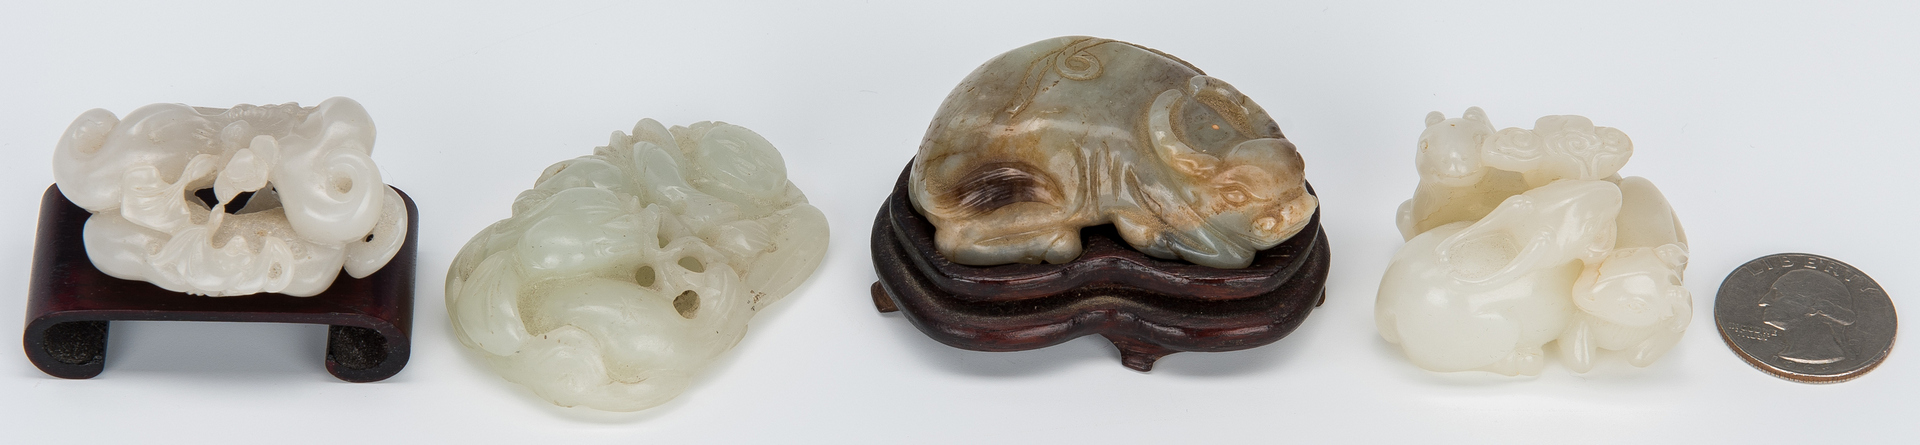 Lot 323: 4 Chinese Carved Jade Items